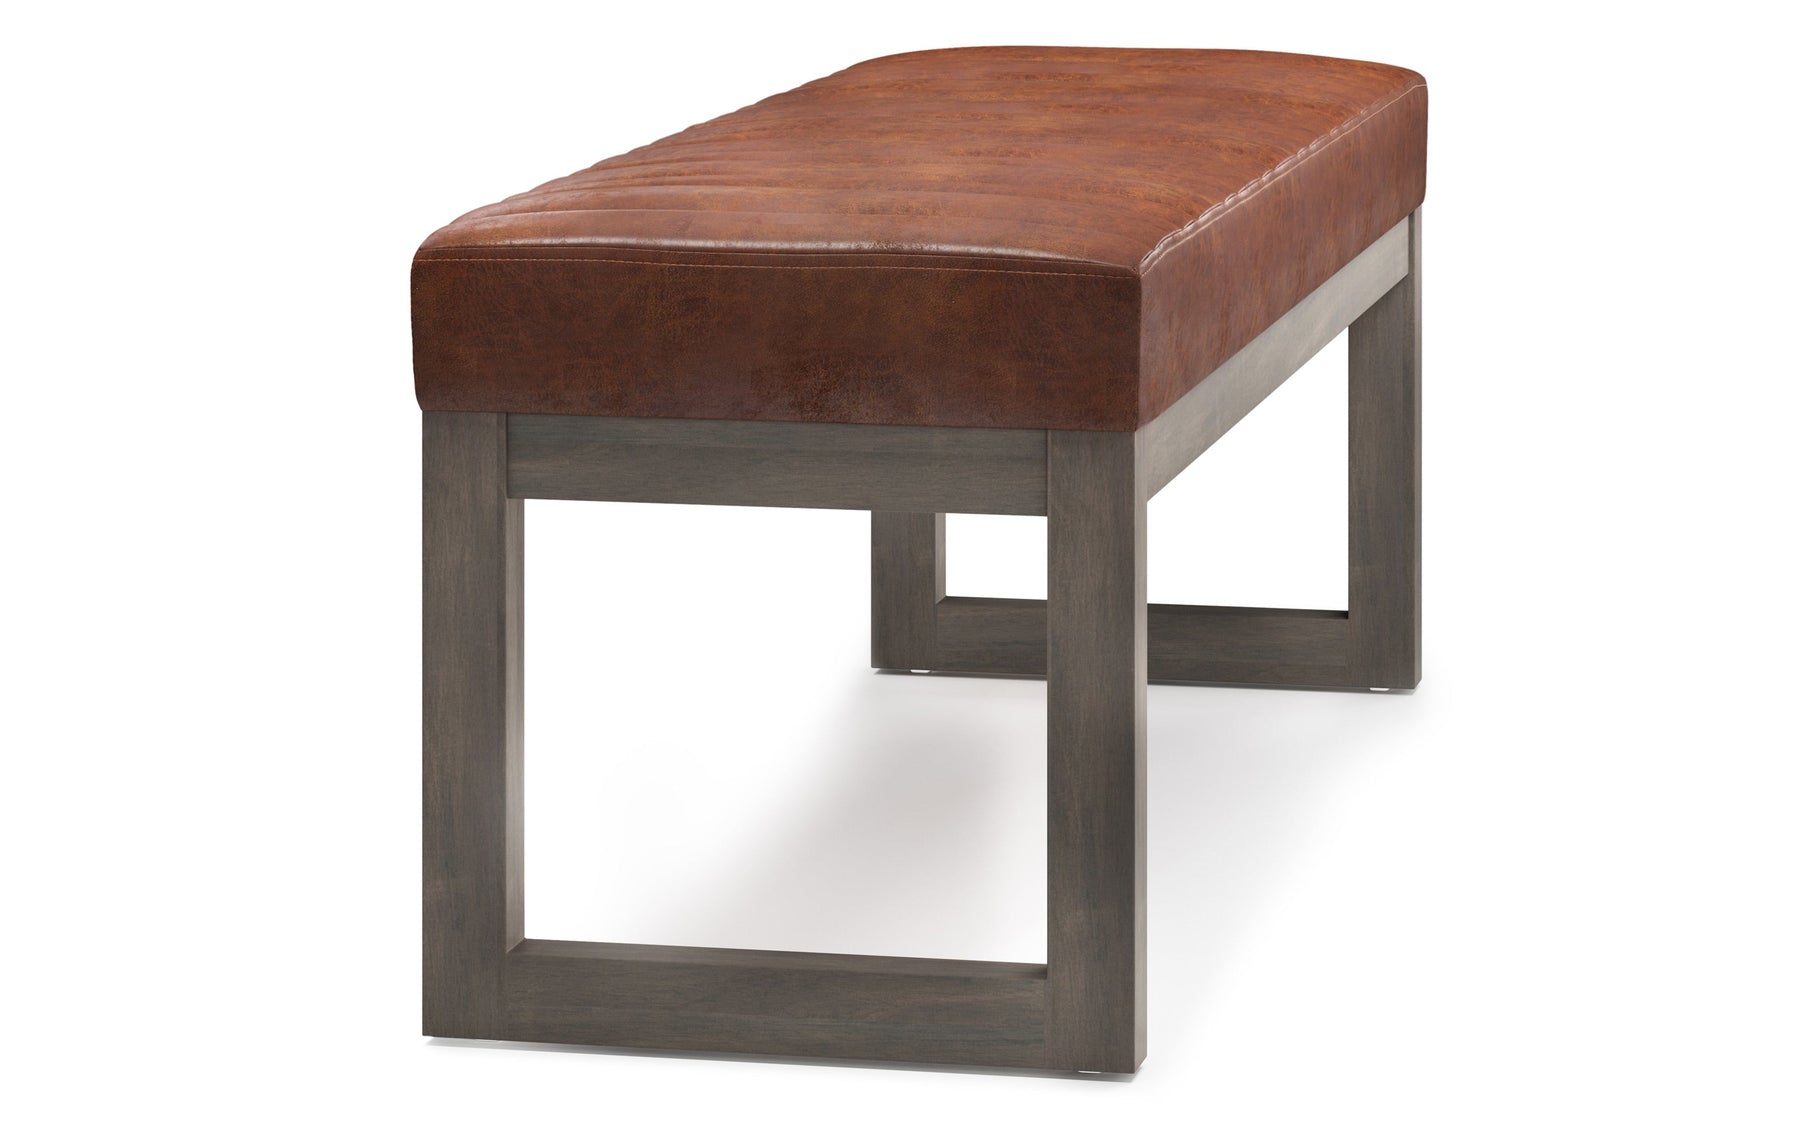 Distressed Saddle Brown Distressed Vegan Leather | Casey Ottoman Bench